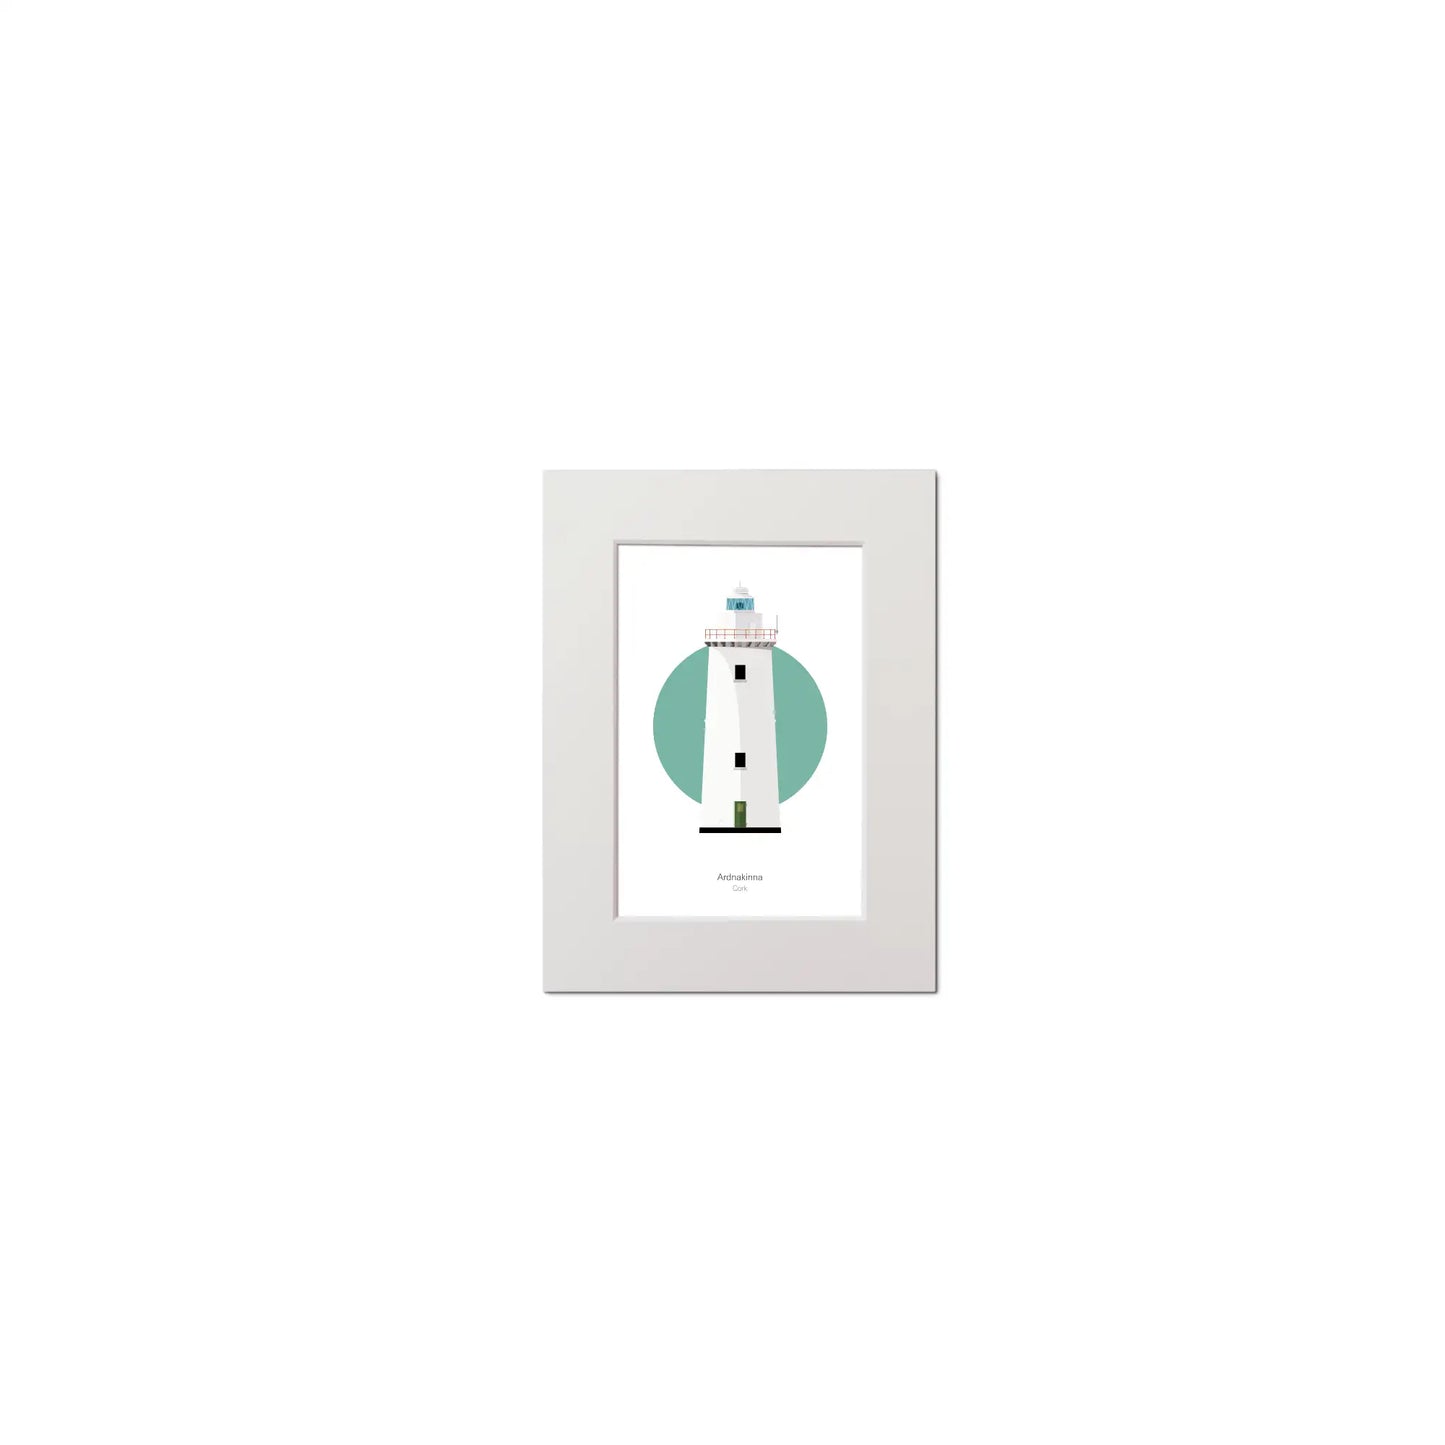 Illustration of Ardnakinna lighthouse on a white background inside light blue square, mounted and measuring 15x20cm.